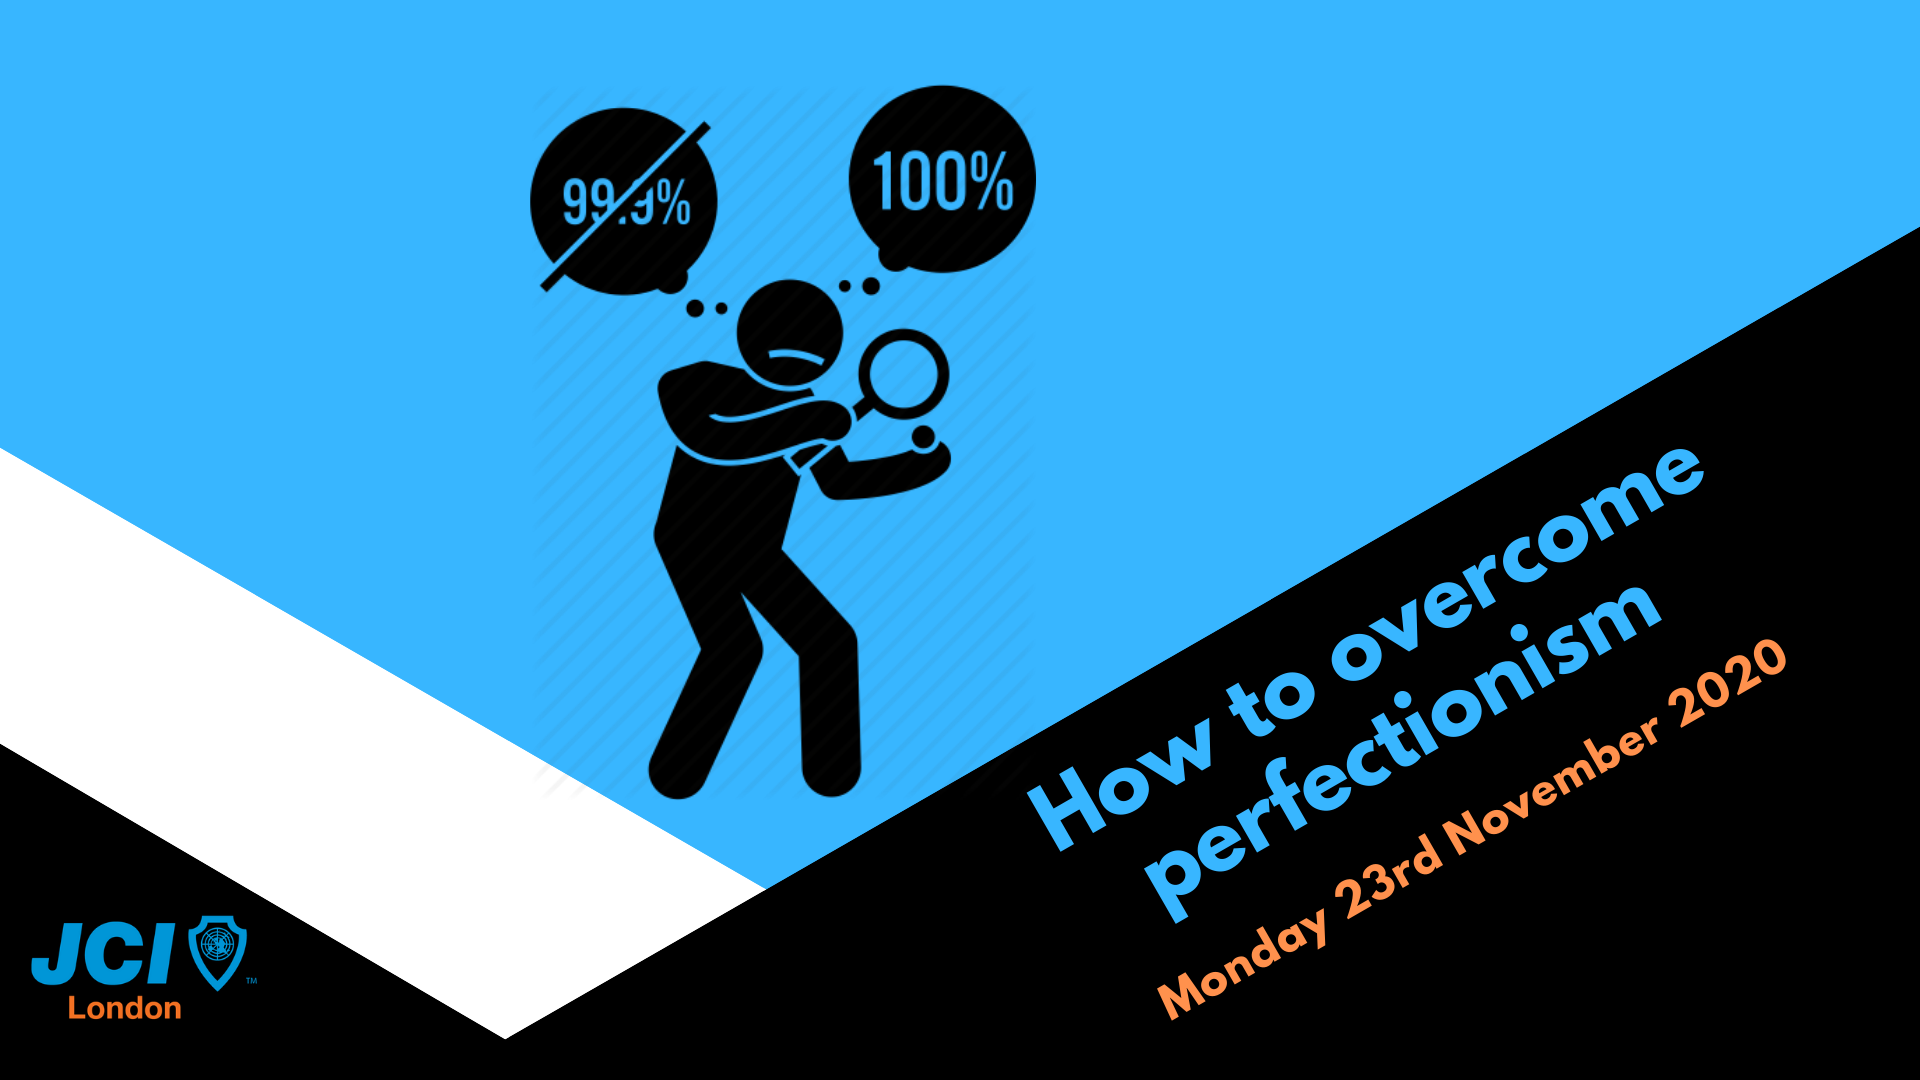 Member Stories: How to overcome Perfectionism